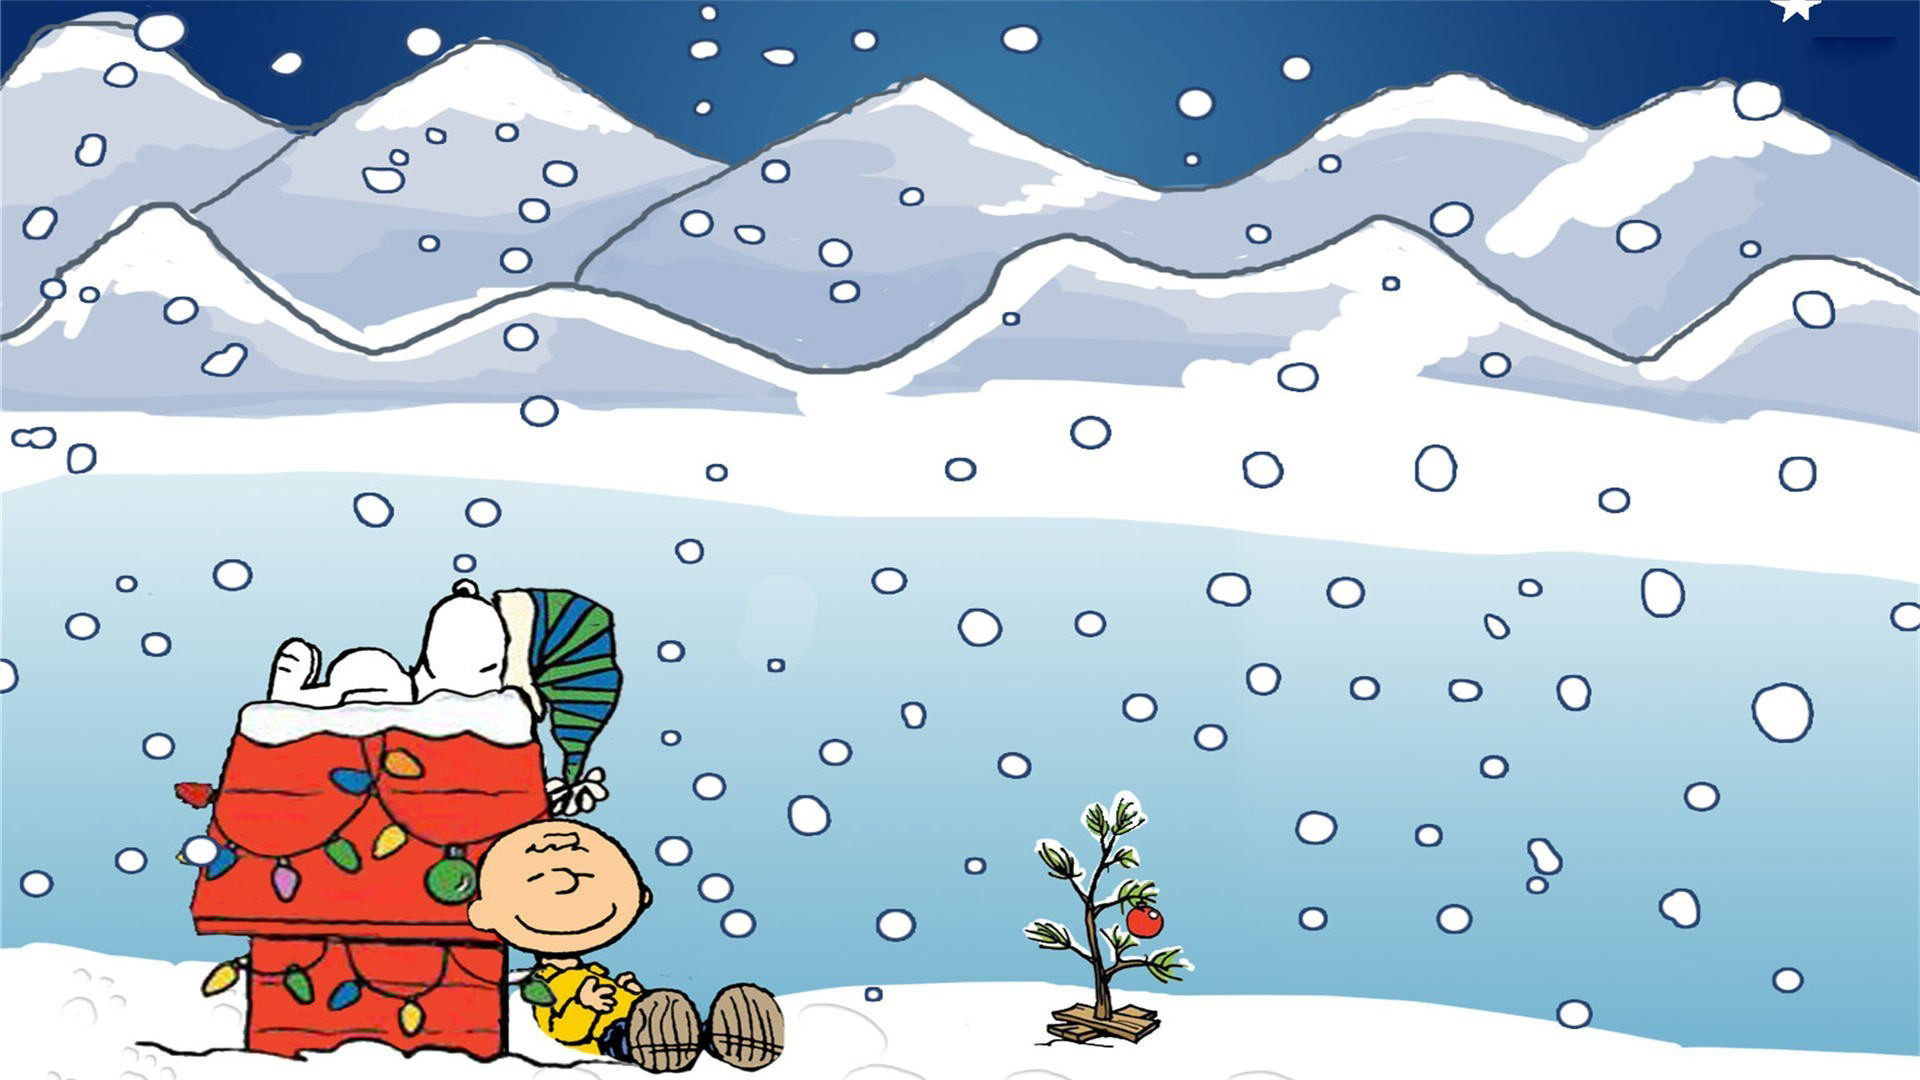 1920x1080 Charlie brown and snoopy cartoon cartoons  wallpapers.